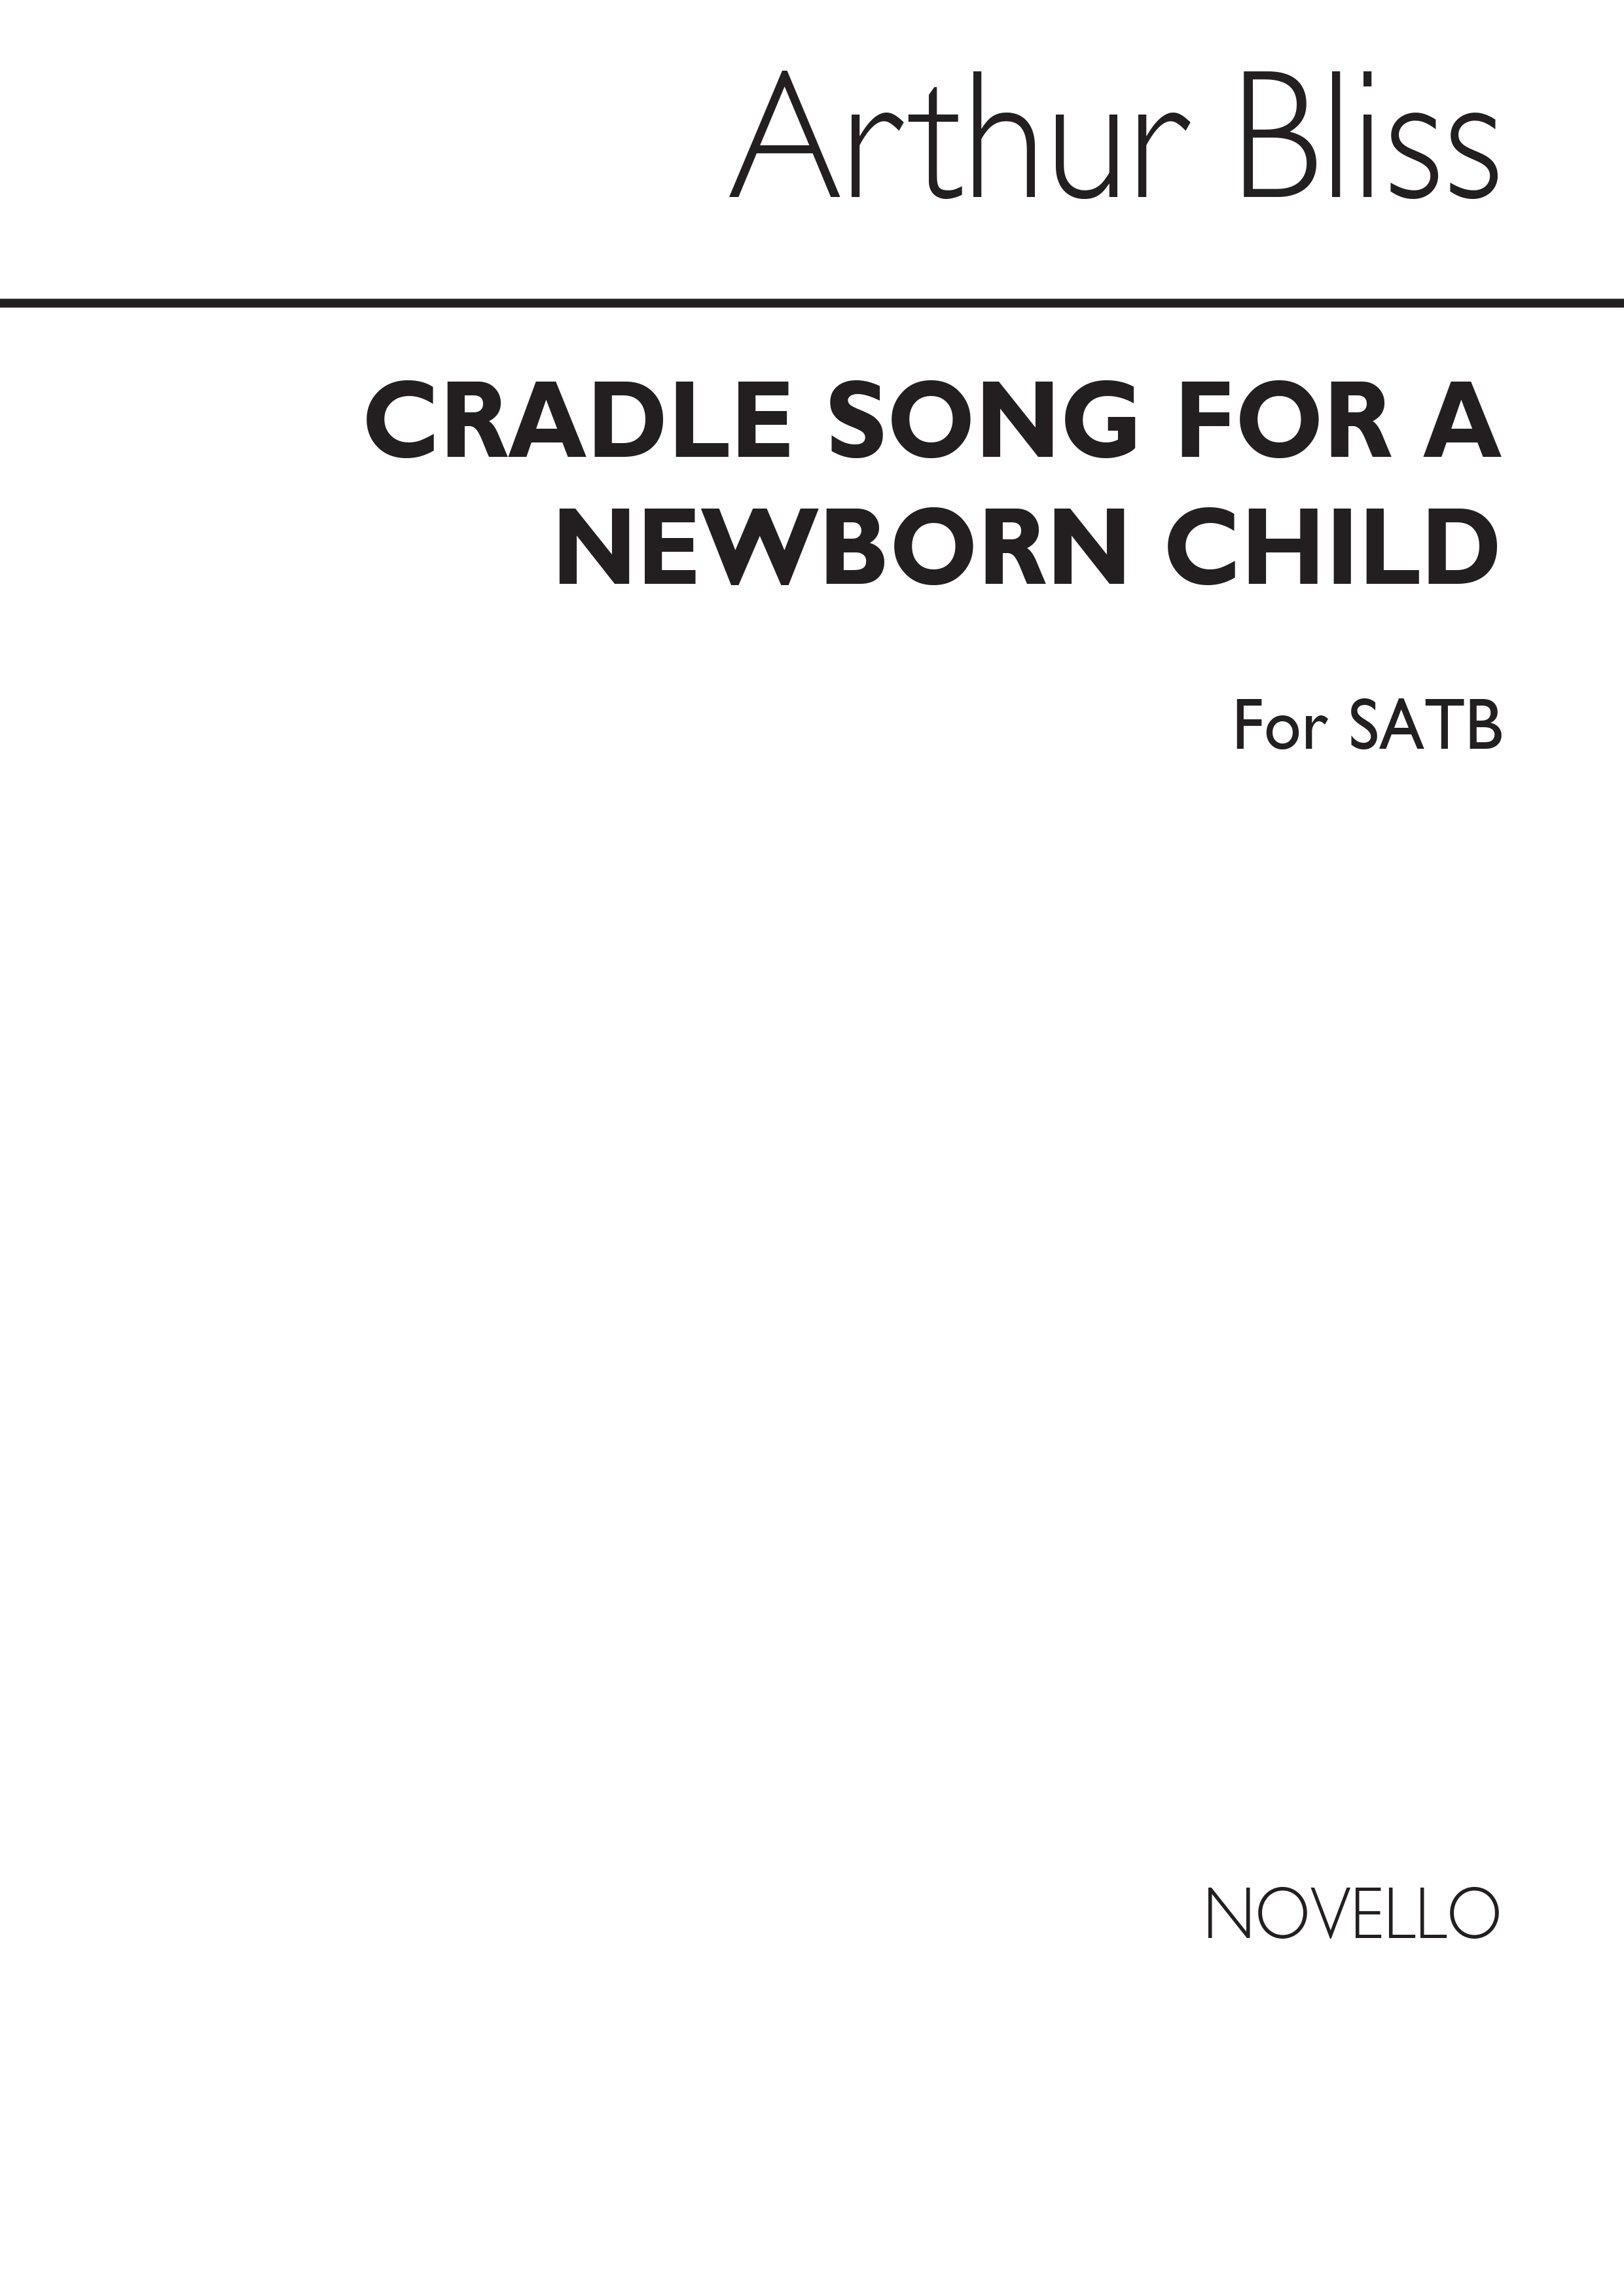 Arthur Bliss: Cradle Song For A Newborn Child